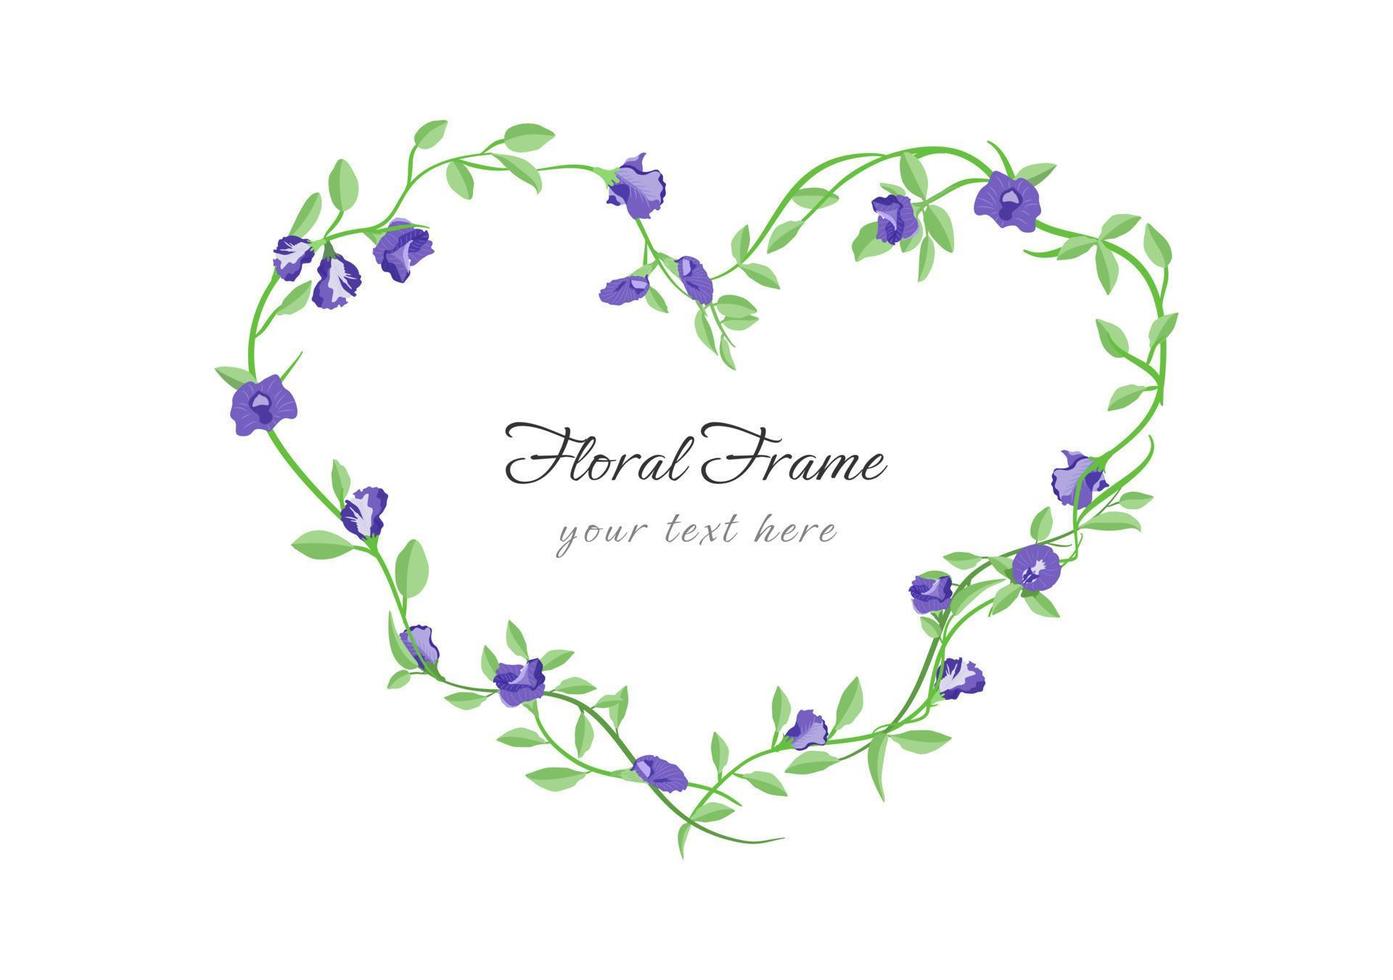 butterfly pea flower in heart frame isolated on white background vector